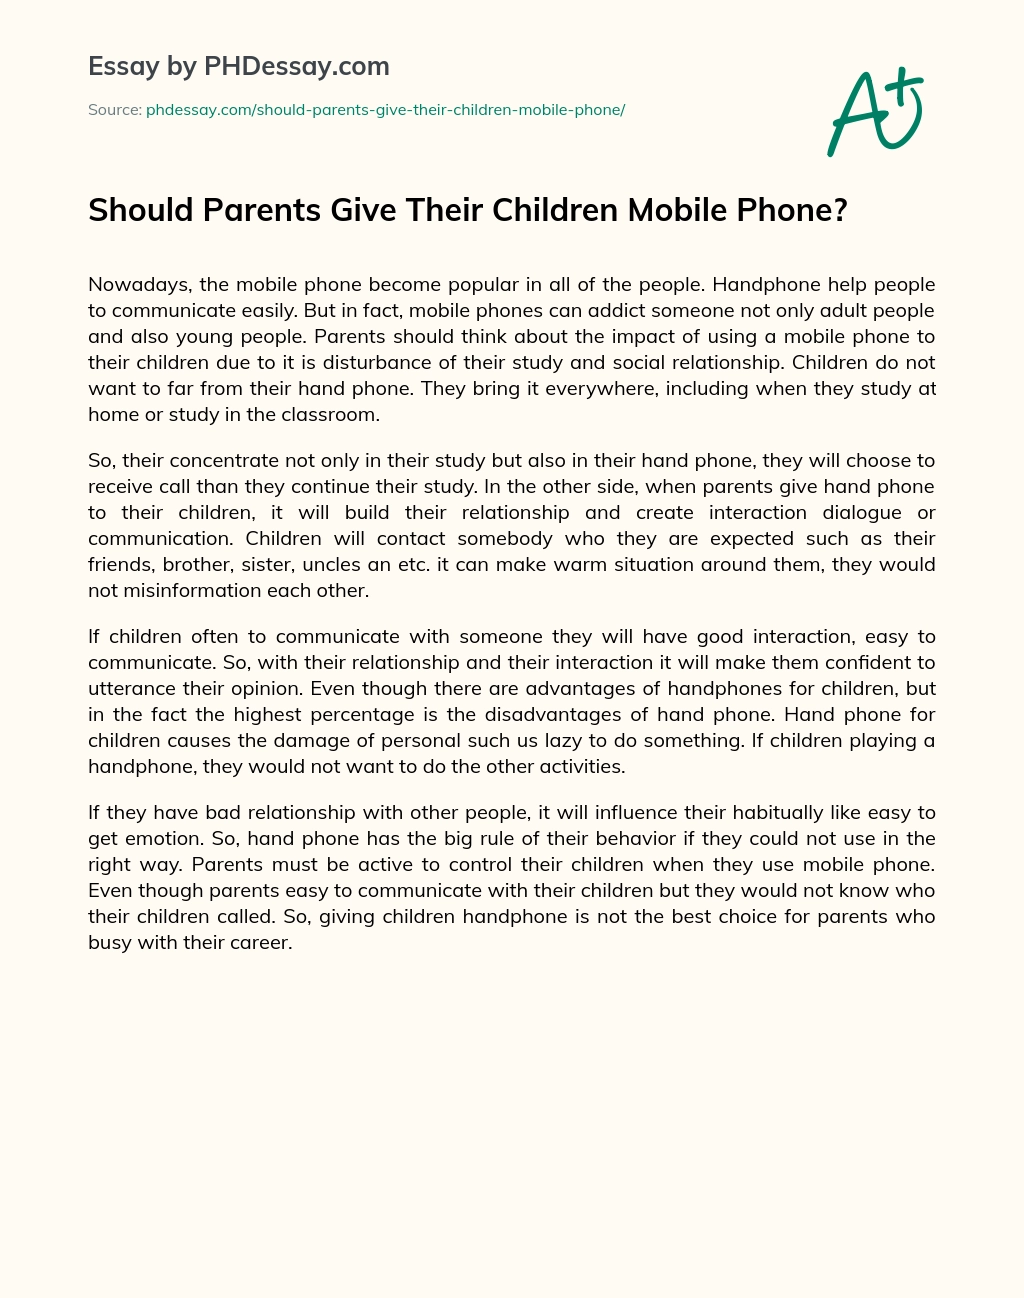 Should Parents Give Their Children Mobile Phone? essay